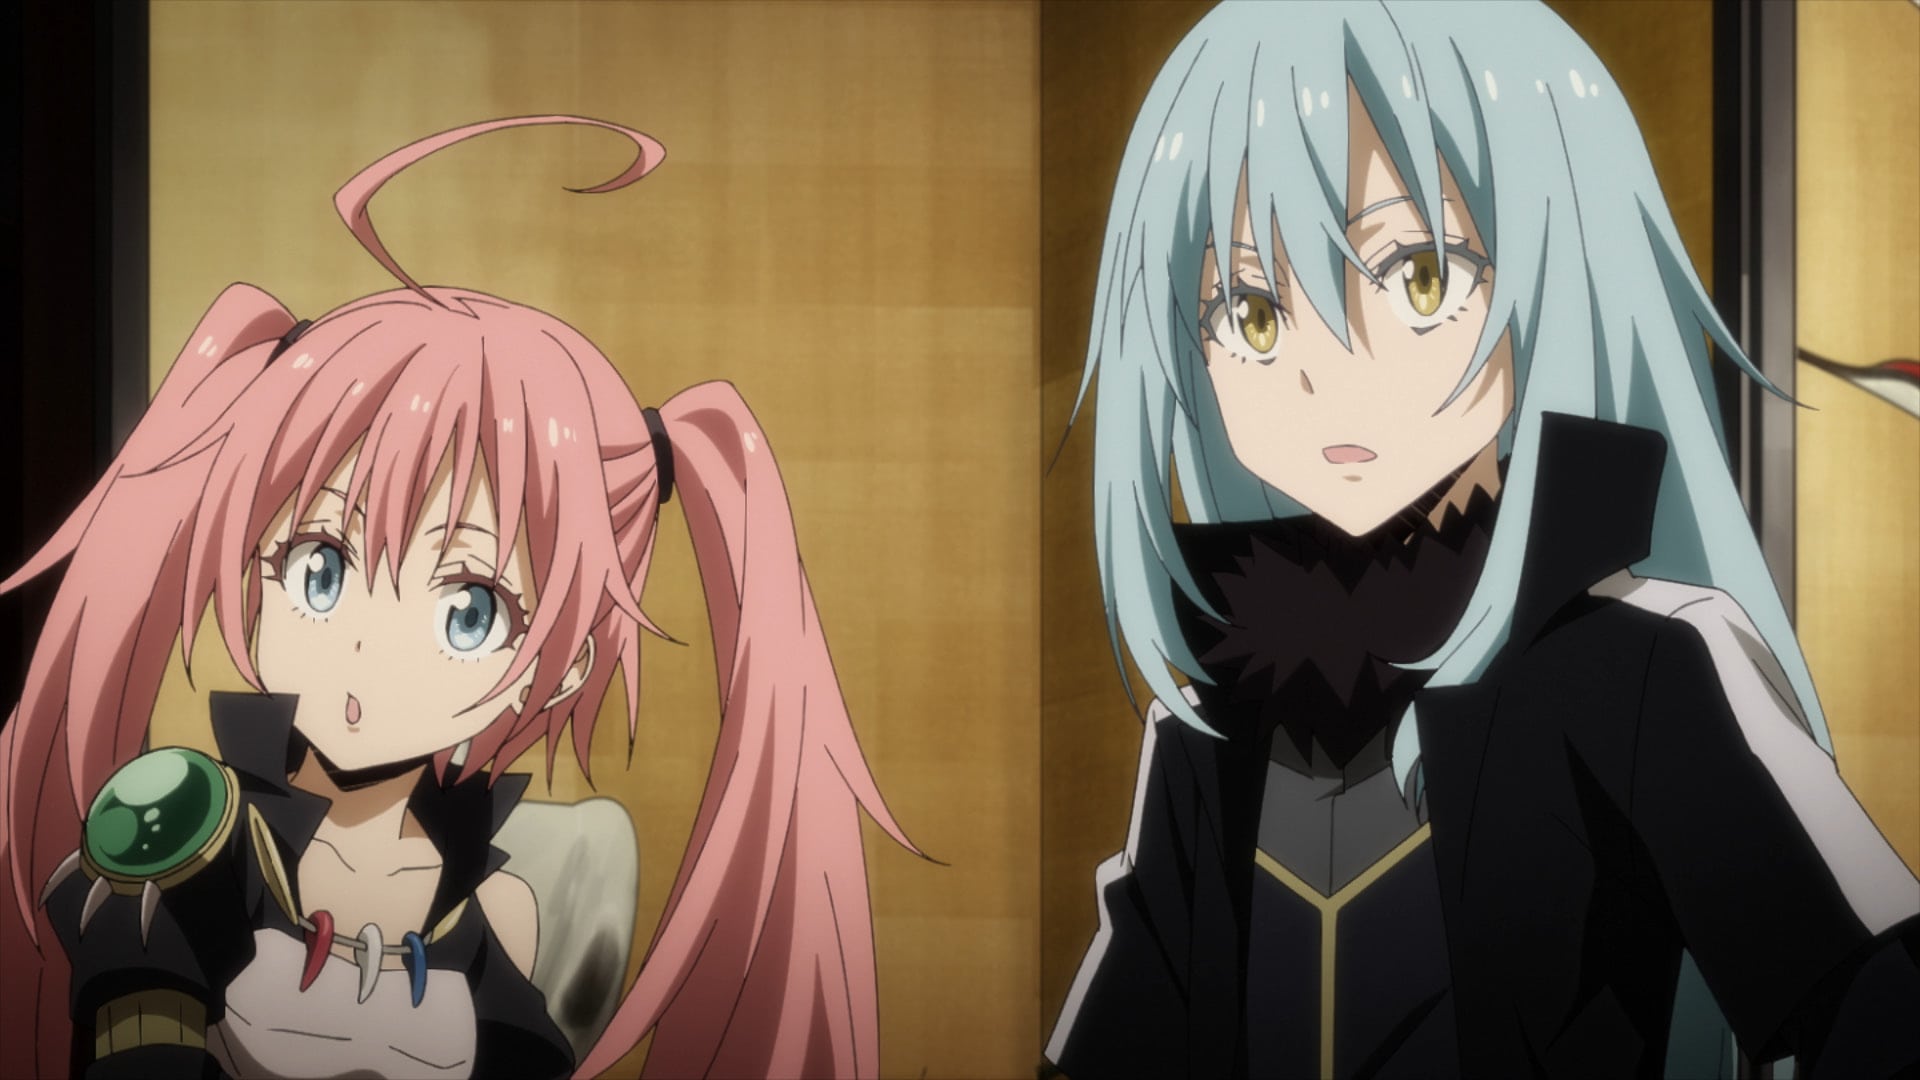 That Time I Got Reincarnated as a Slime the Movie - Scarlet Bond